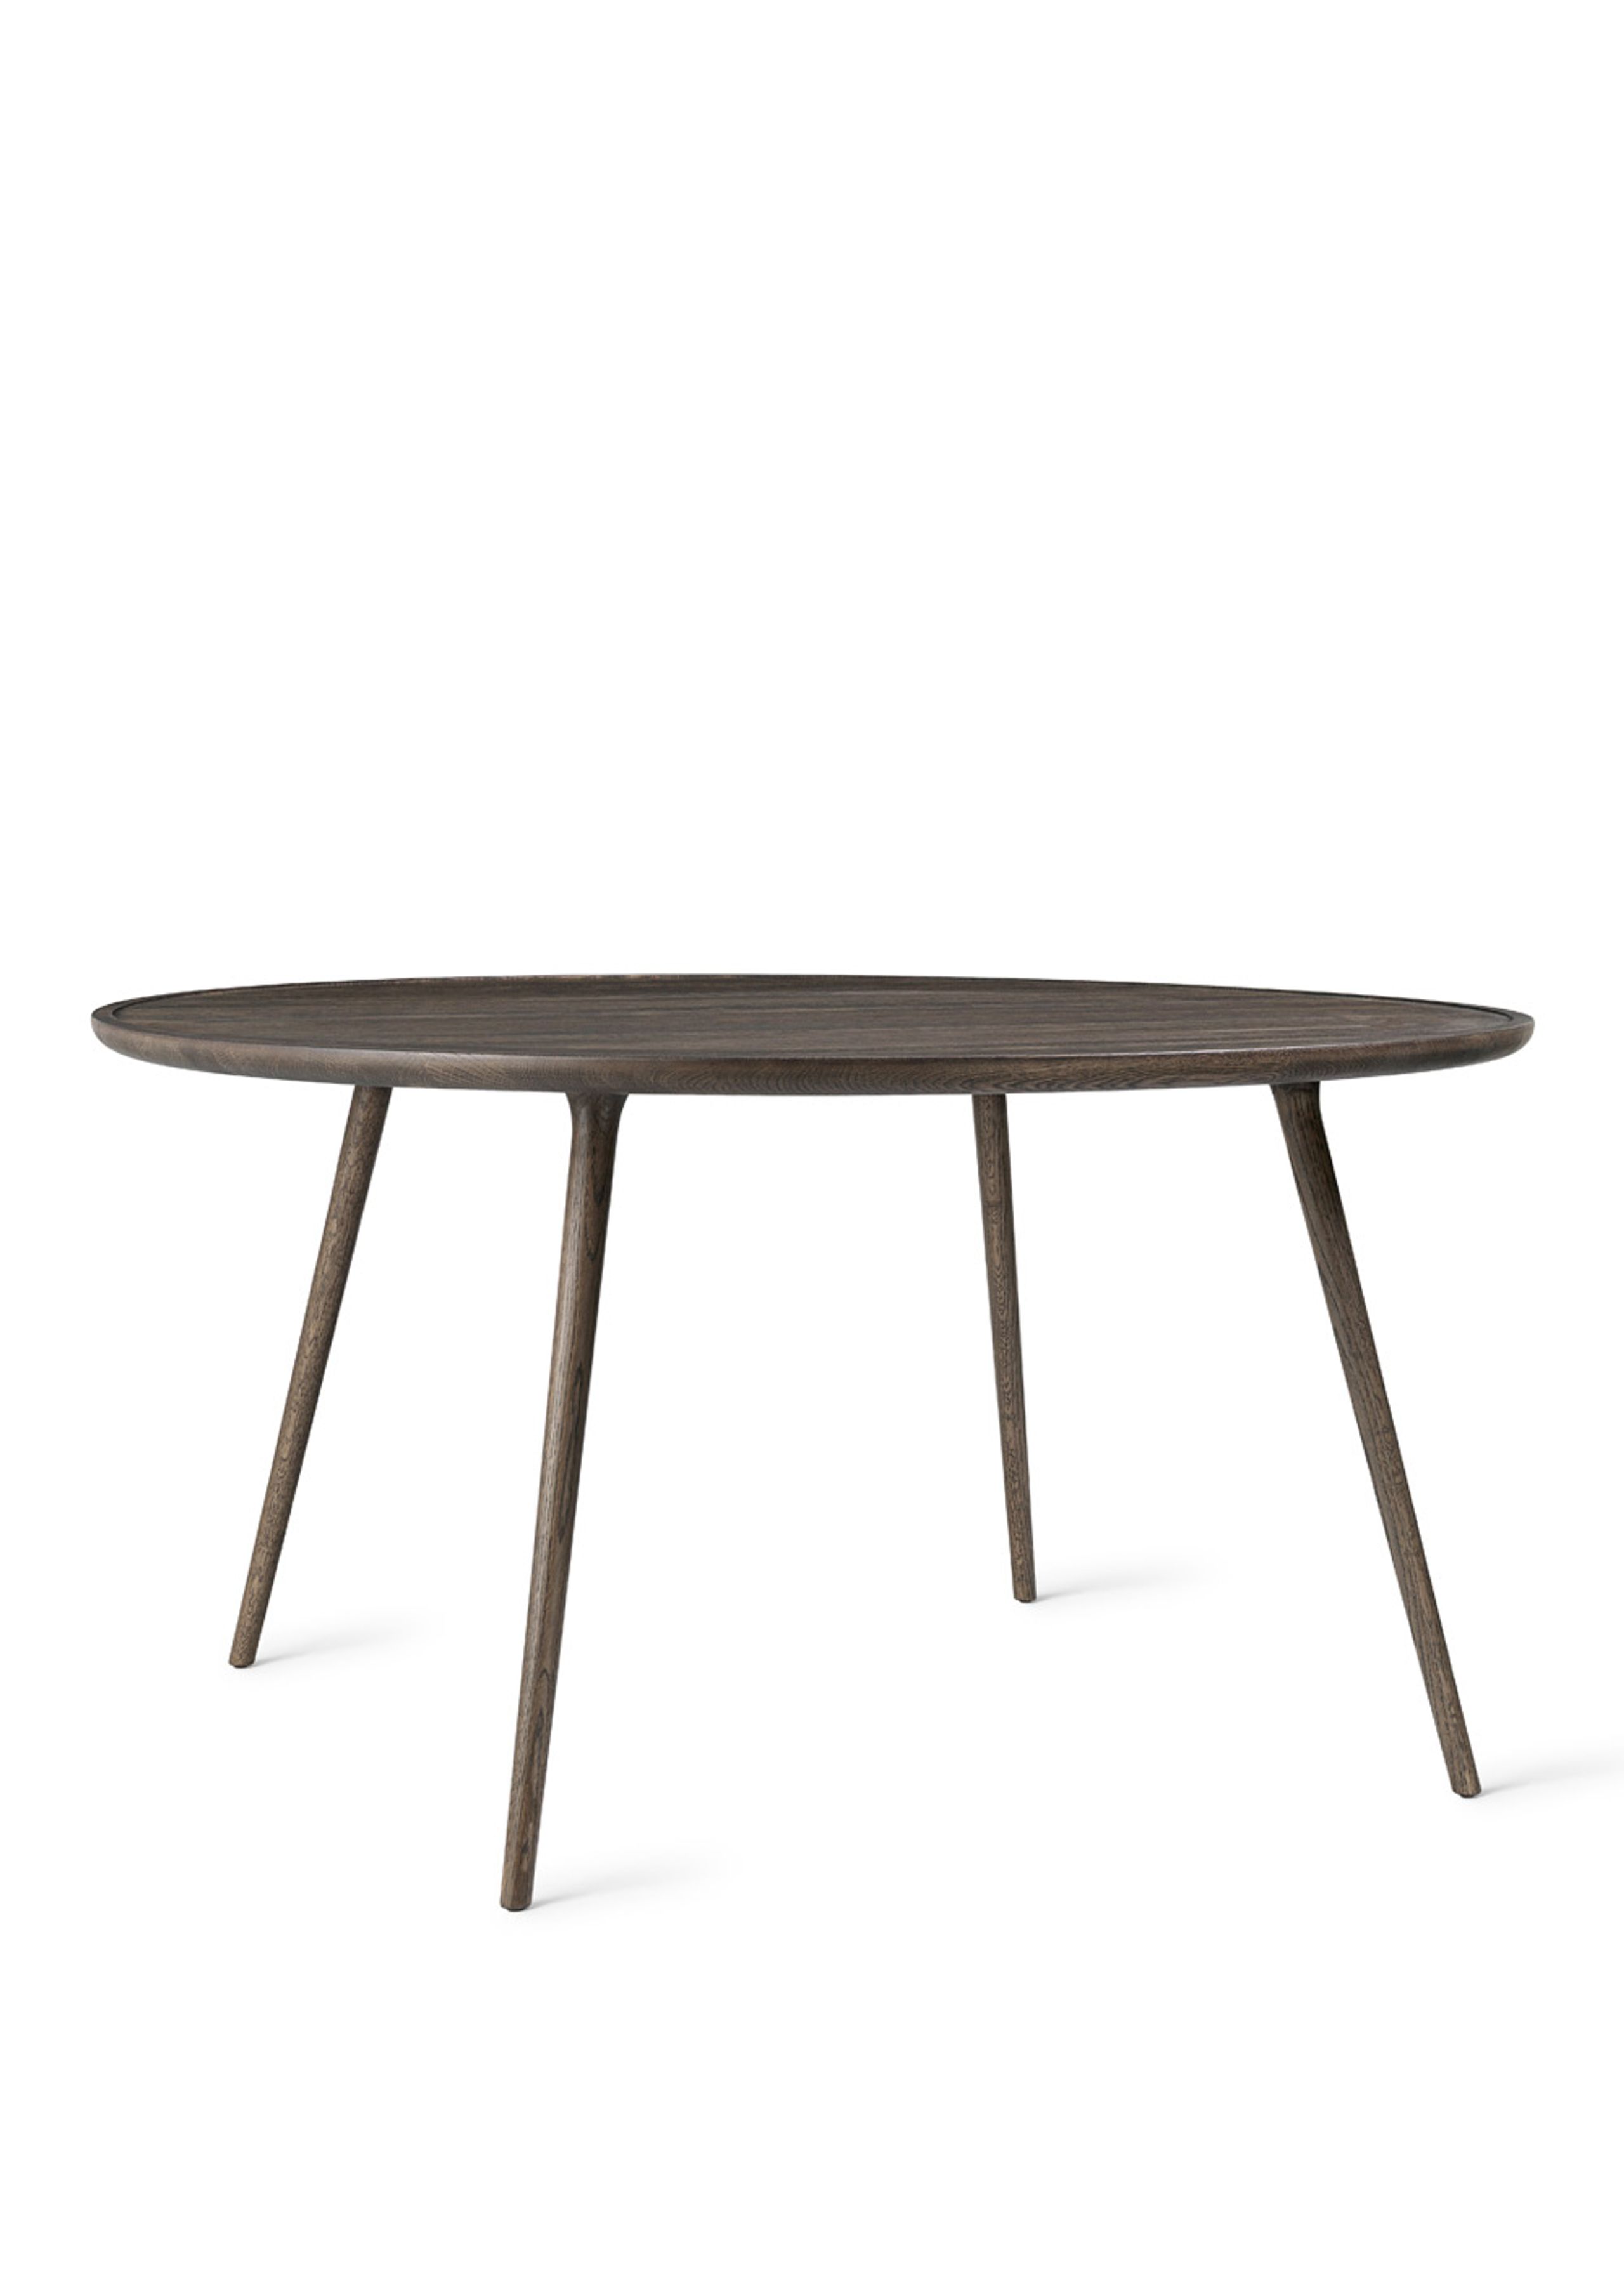 Mater - Mesa de jantar - Accent Dining Table - Sirka grey stained oak